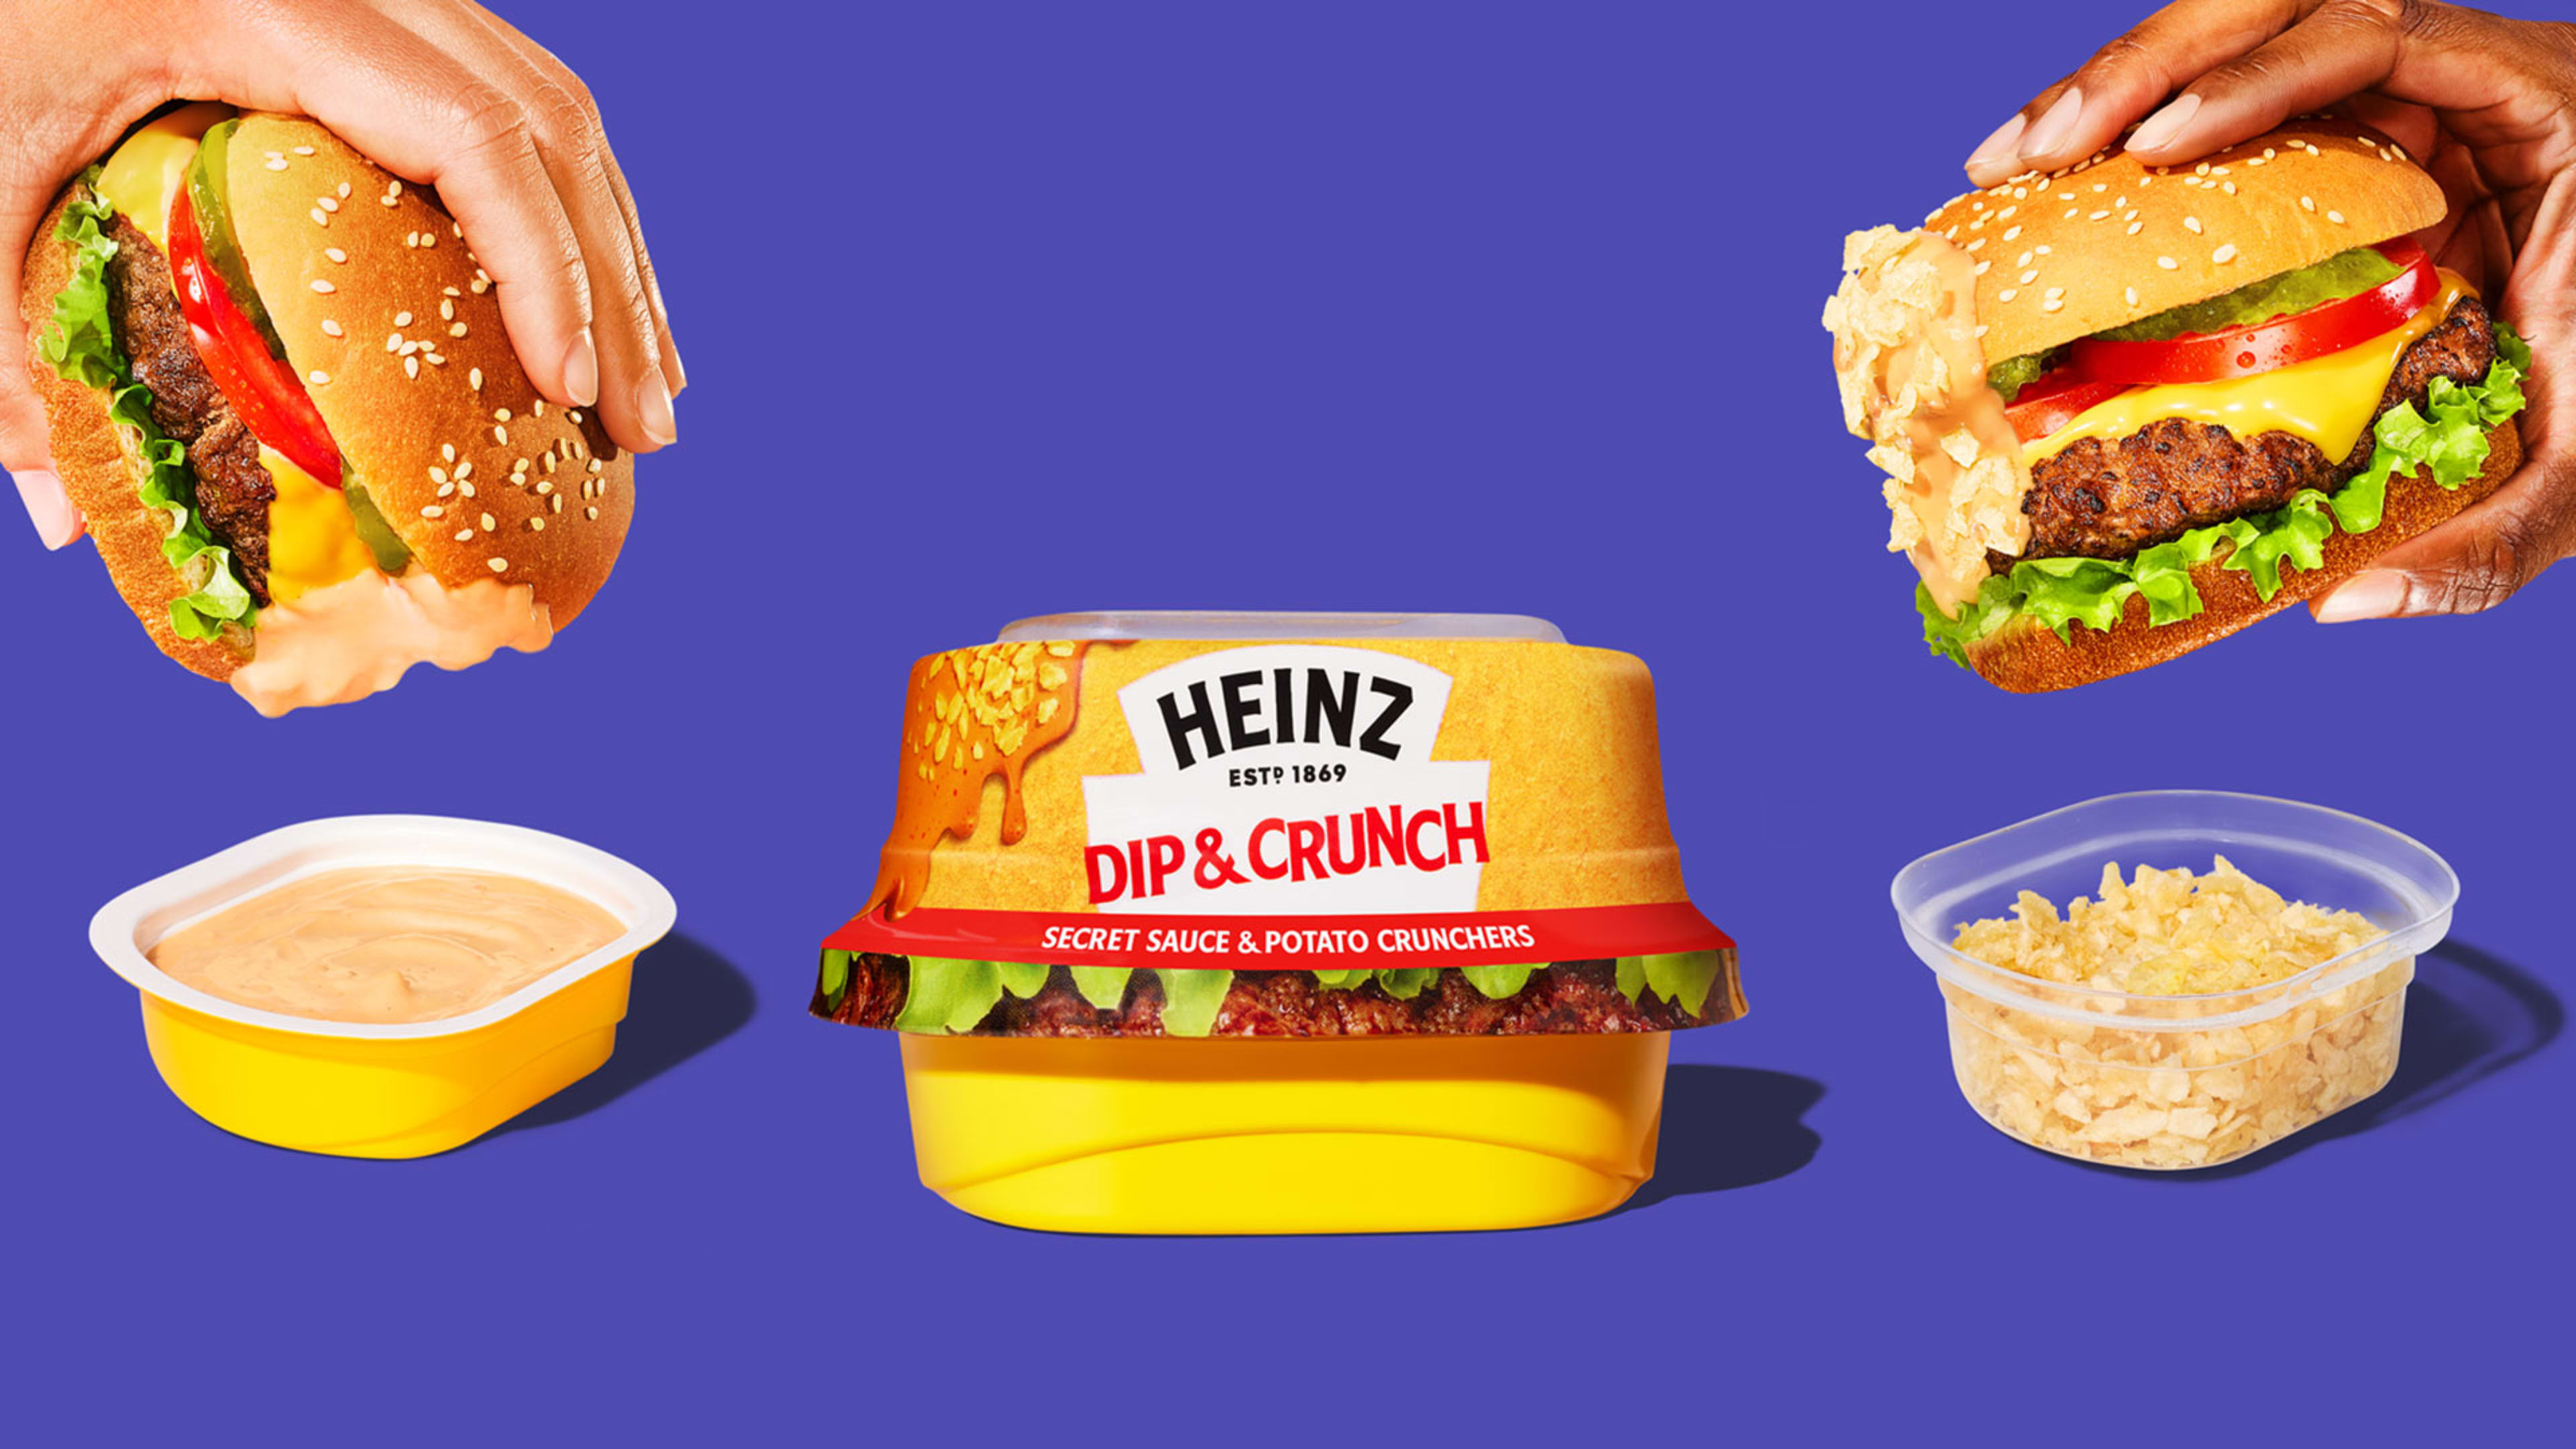 Heinz has a new crunchy dipping sauce that went from viral TikTok trend to actual burgers